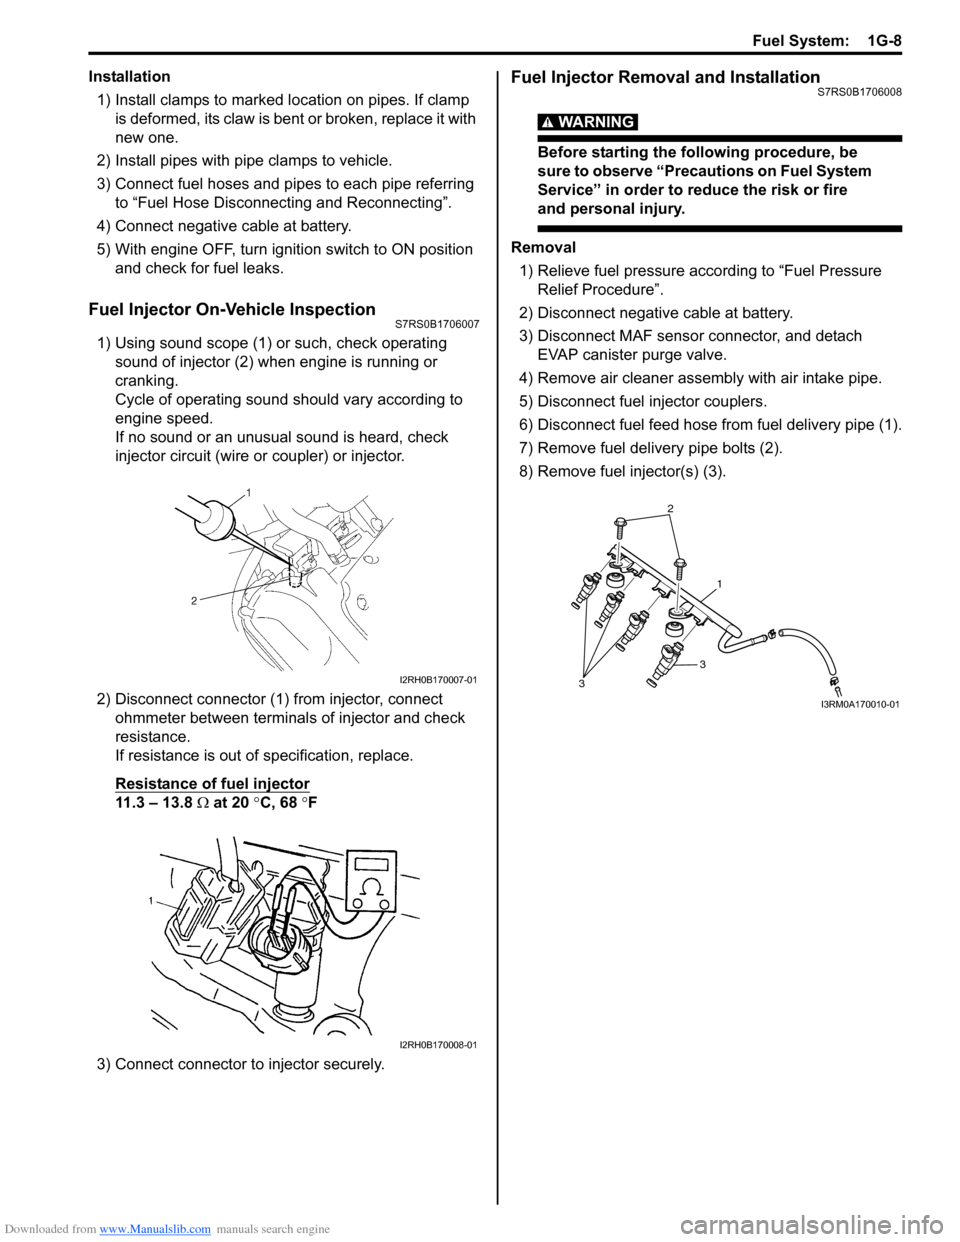 SUZUKI SWIFT 2007 2.G Service Workshop Manual Downloaded from www.Manualslib.com manuals search engine Fuel System:  1G-8
Installation1) Install clamps to marked location on pipes. If clamp  is deformed, its claw is bent  or broken, replace it wi